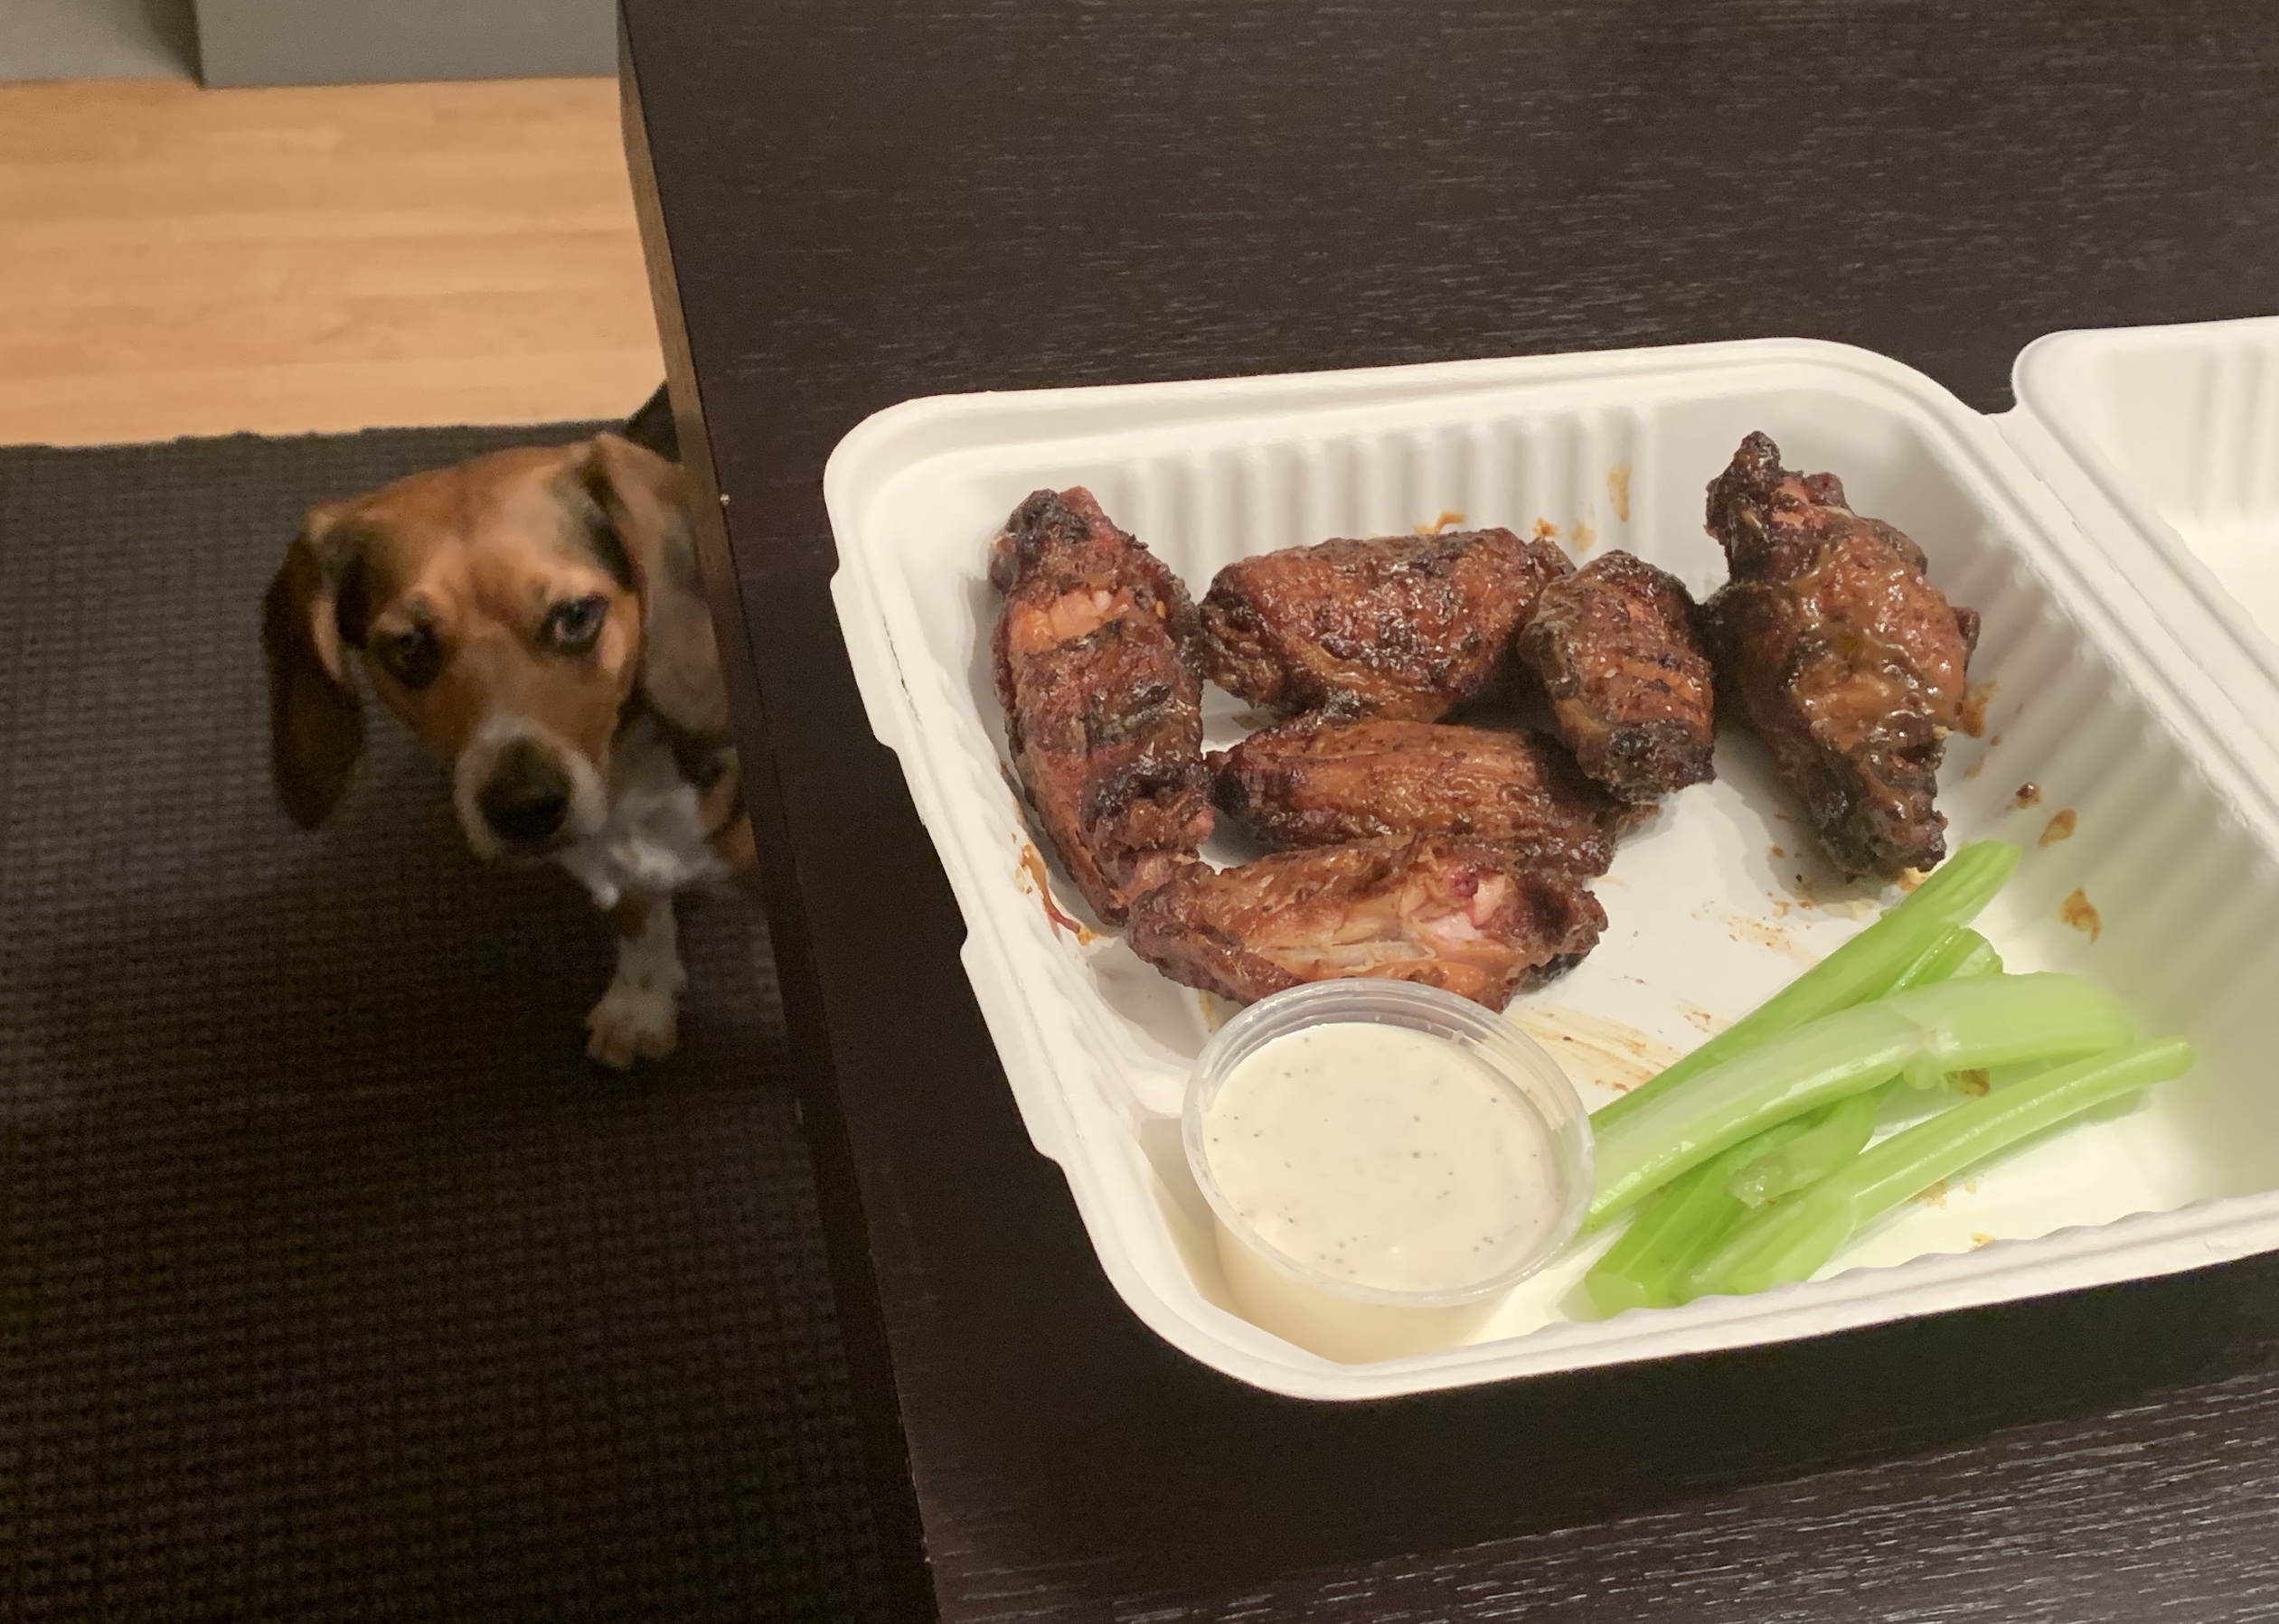 A puppy peeks at the counter which has a white takeout container open revealing six wings with a cup of sauce. Photo by Stephanie Wheatley.